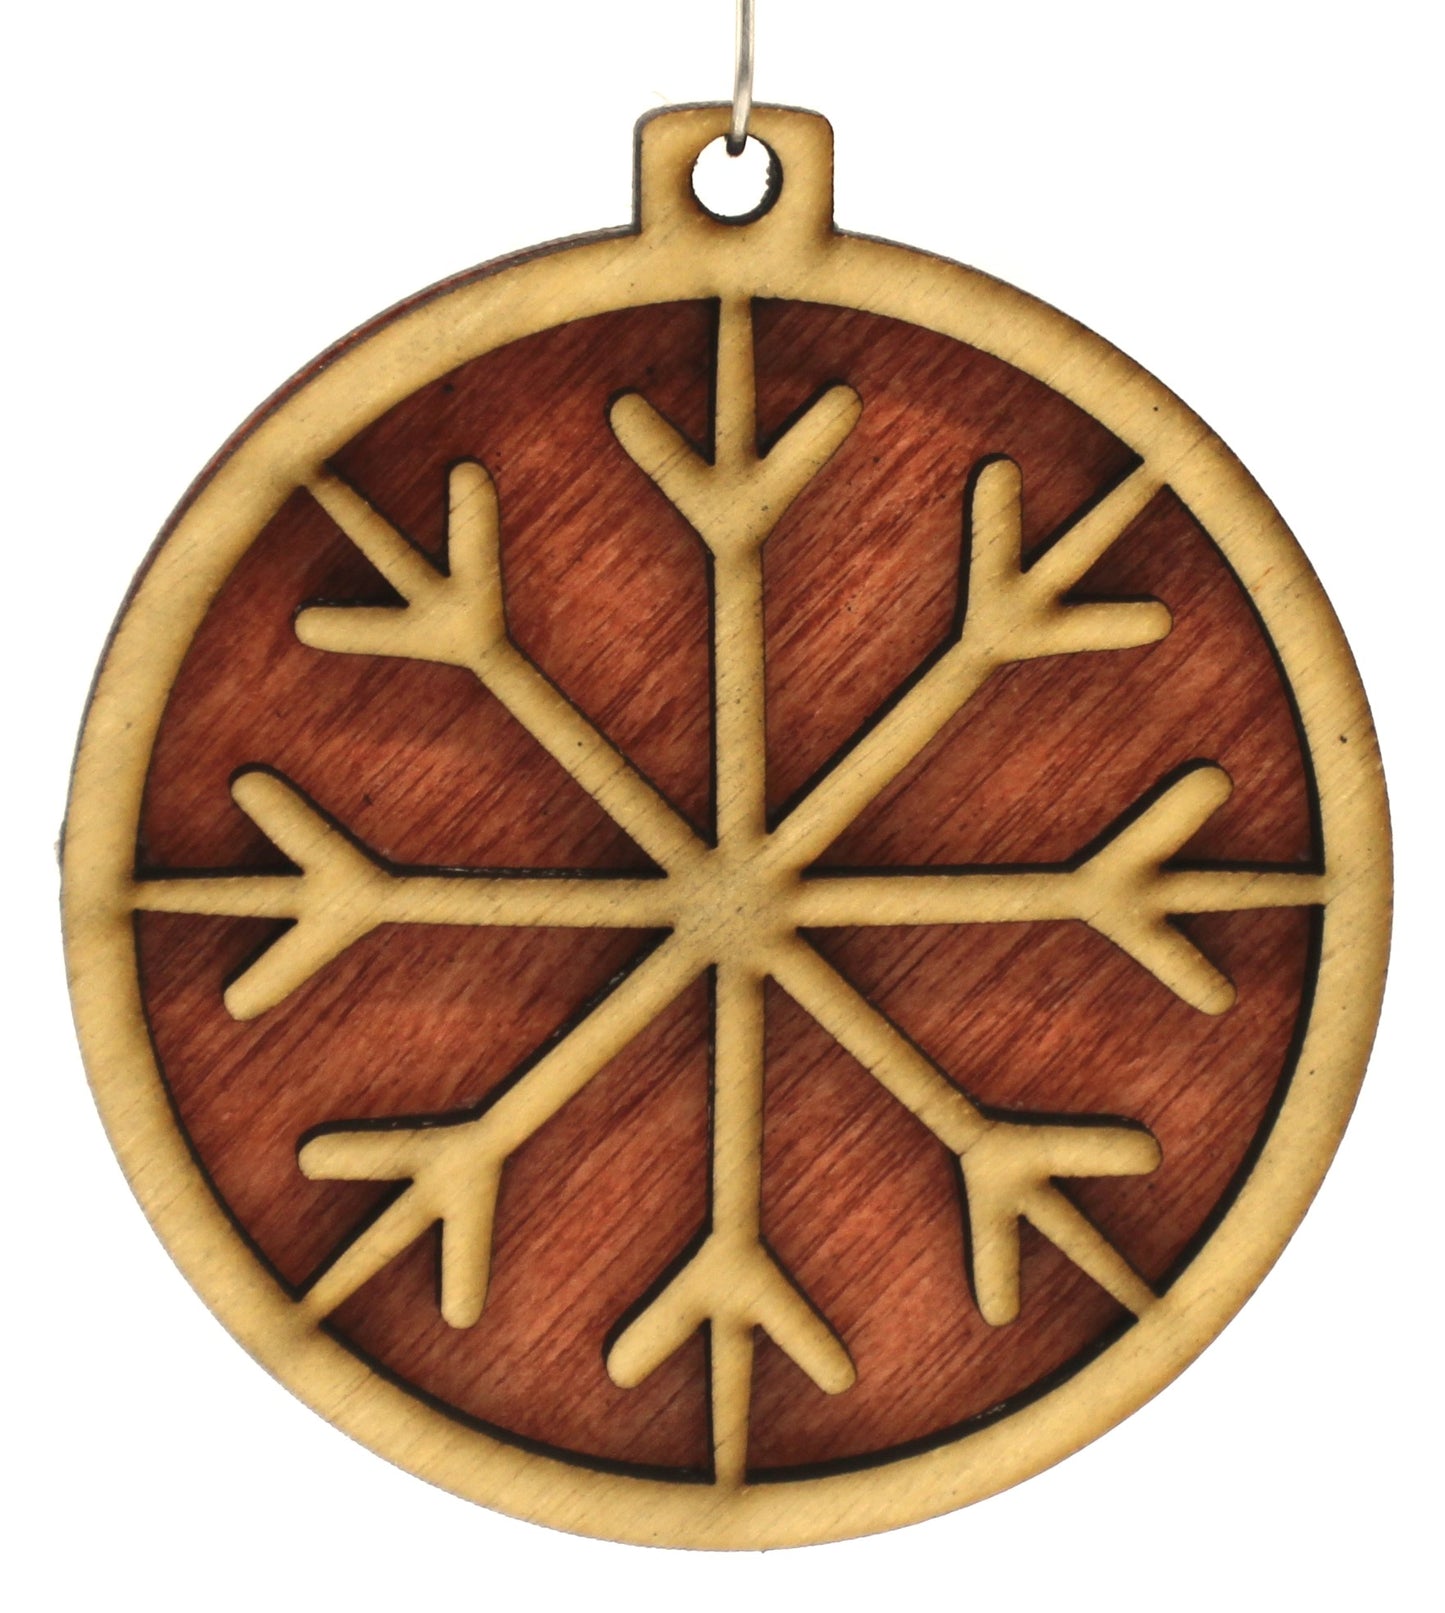 Old fashioned Snowflake Christmas Ornament version 1